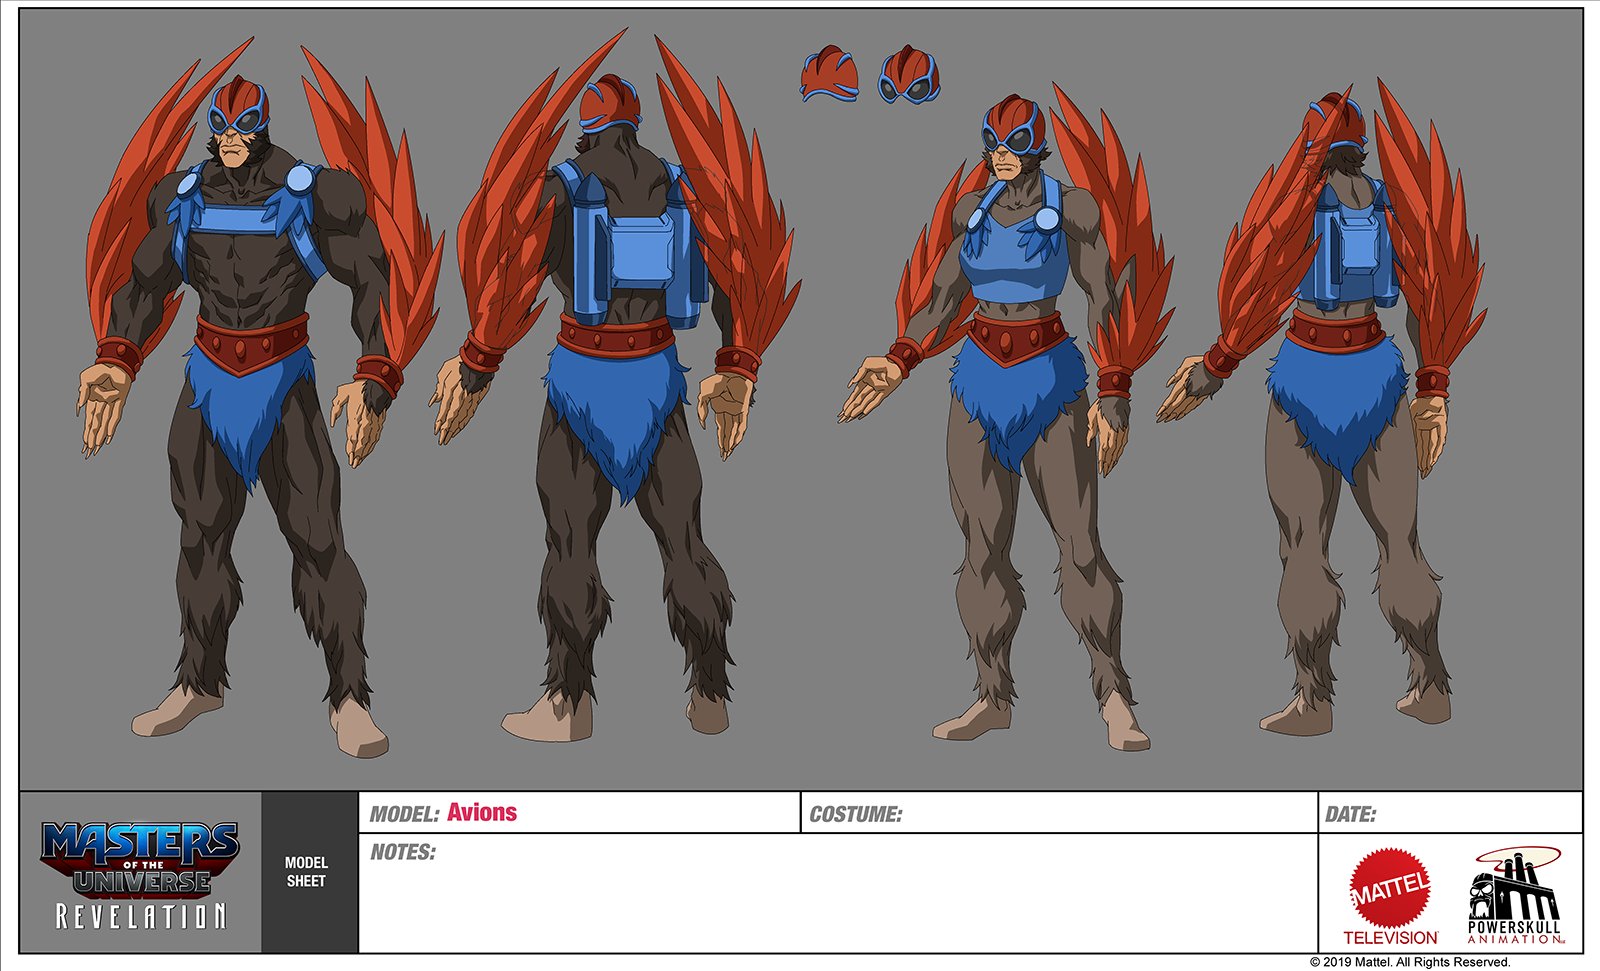 The King & Queen in Battle Gear! Eternian Allies! Shadow Beasts! Powerhouse Animation shares more design models for Masters of the Universe: Revelation.